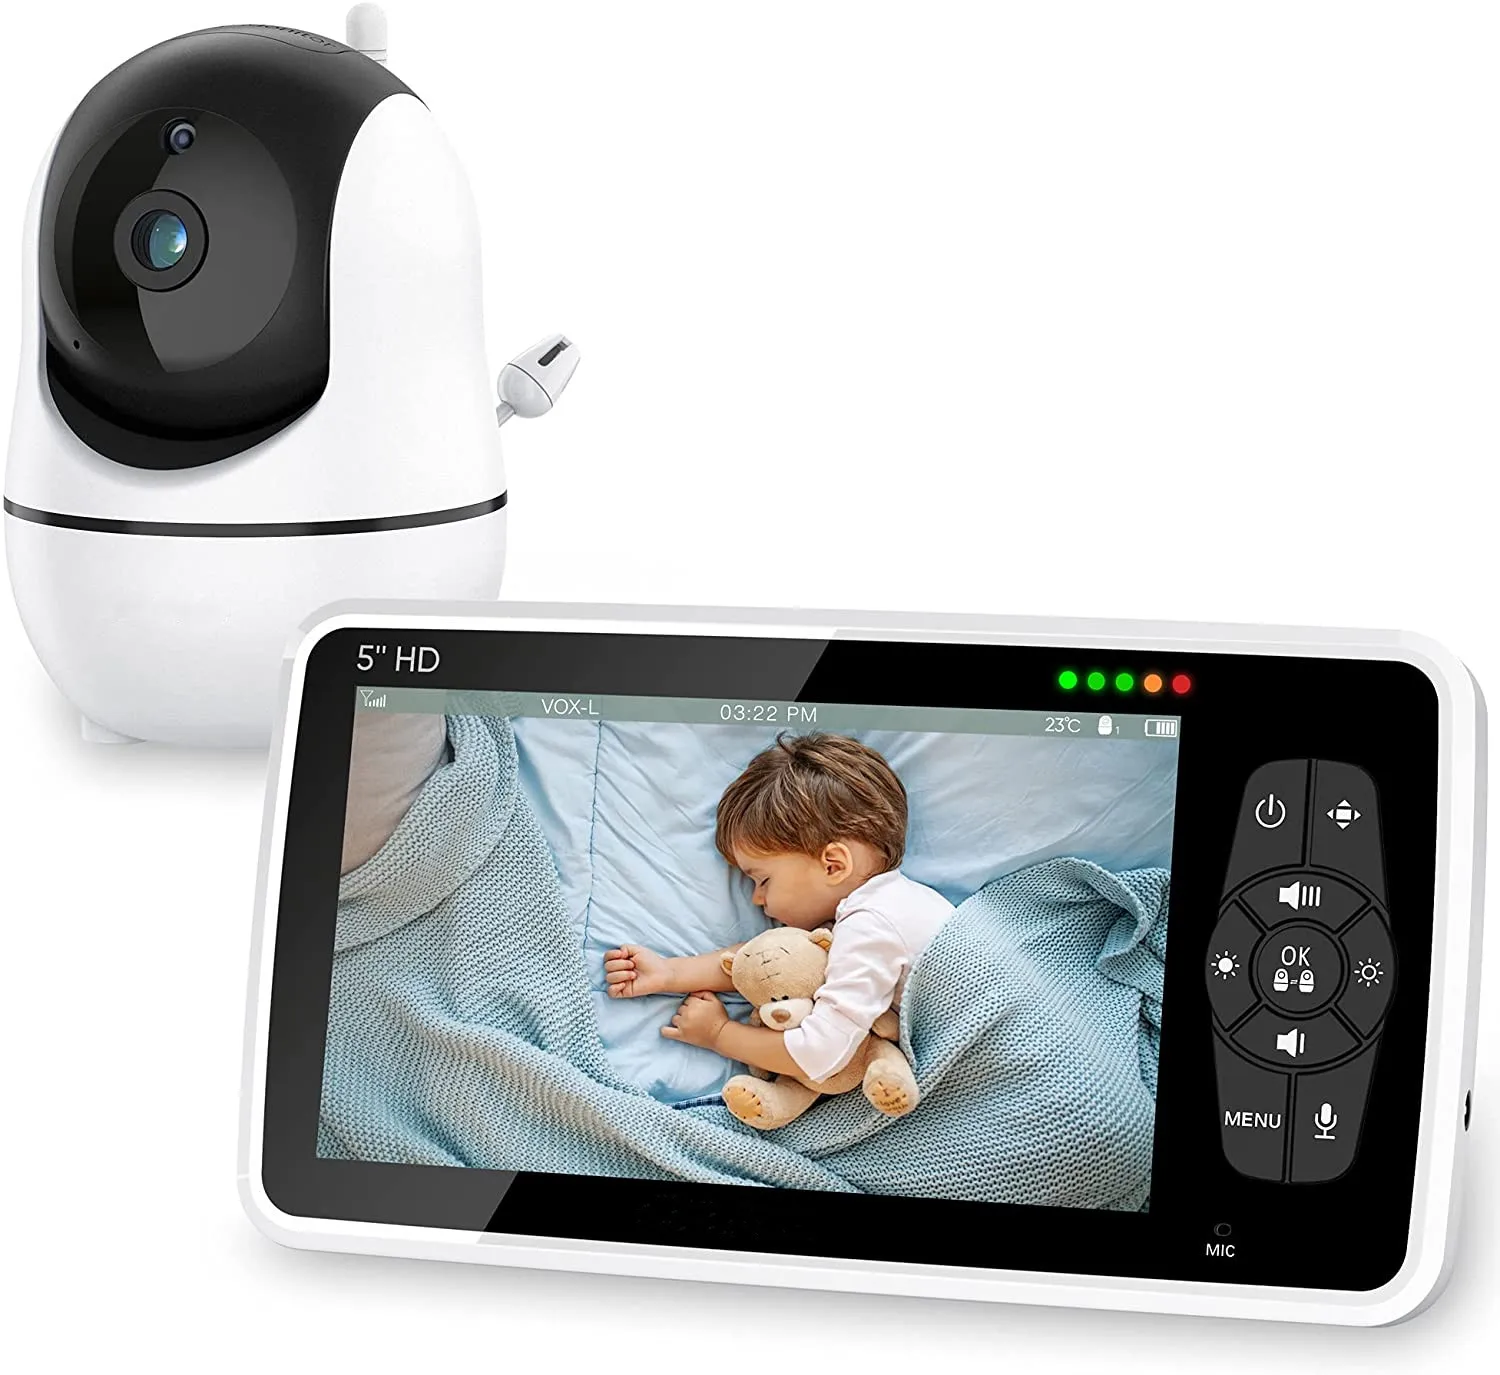 5.0 Inch Baby Monitor With Camera Wireless Video Nanny 720p Hd